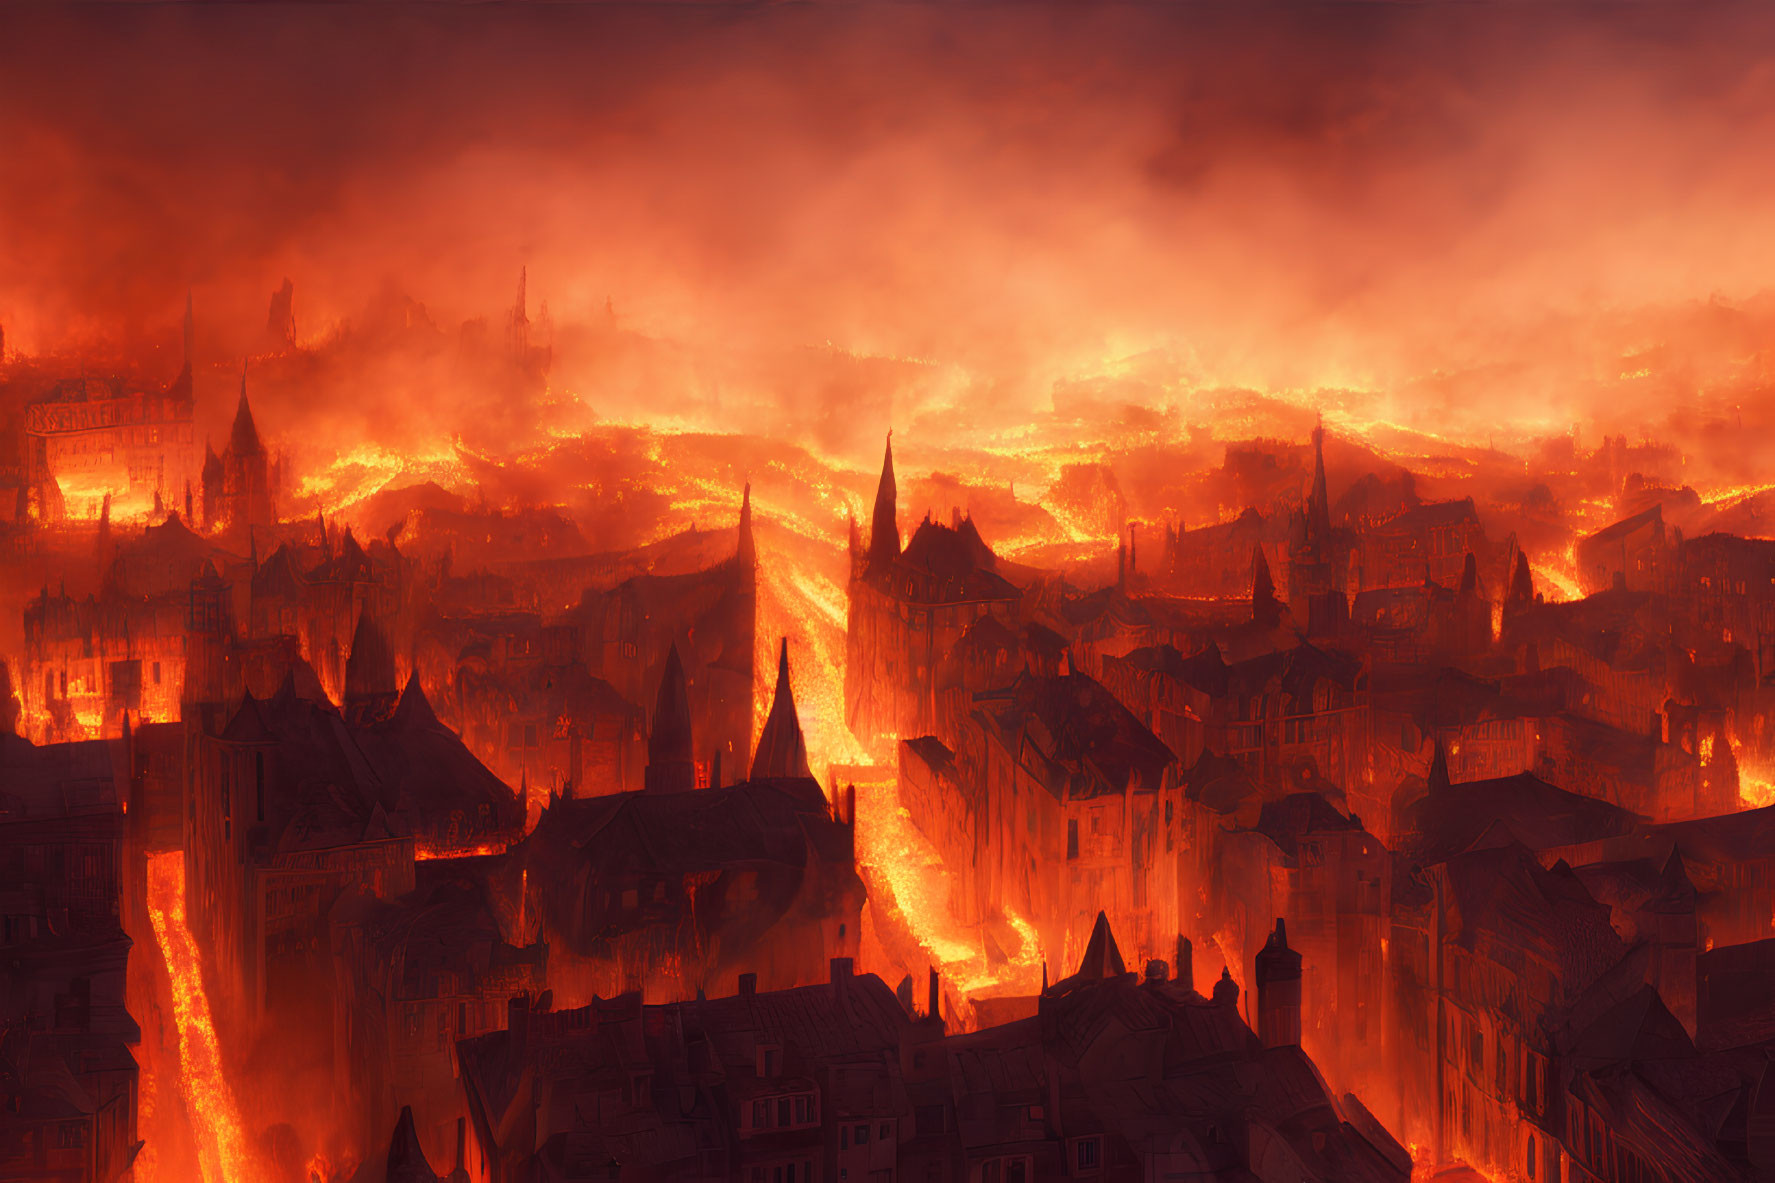 City engulfed in flames with ominous orange glow and smoke-filled sky